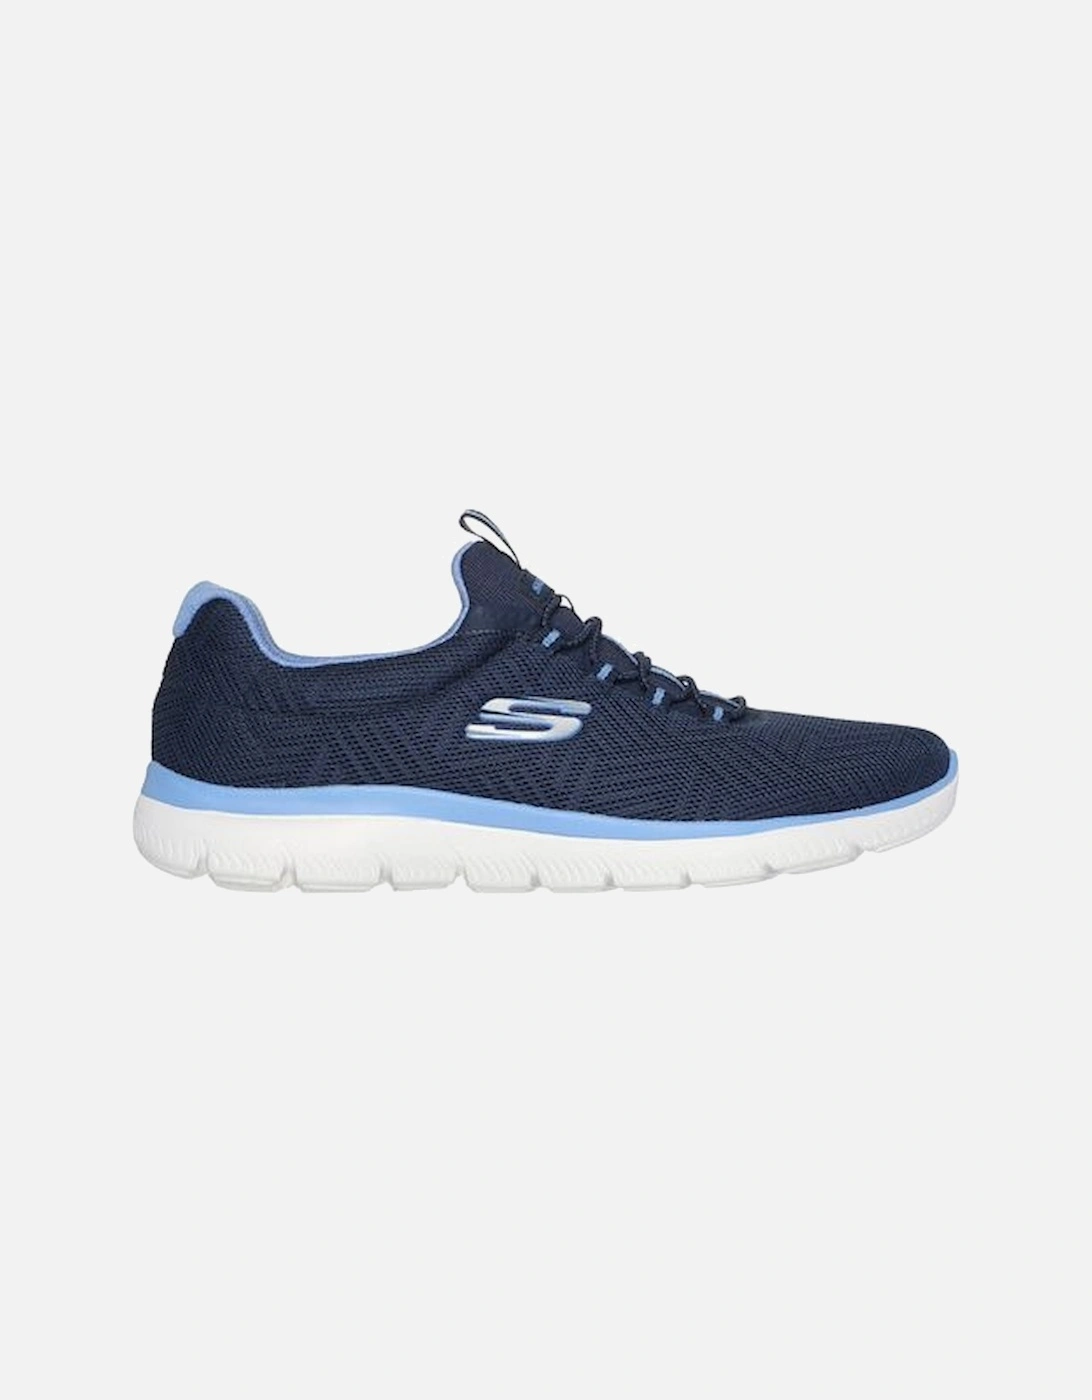 150119 Summits in Navy/Blue, 2 of 1